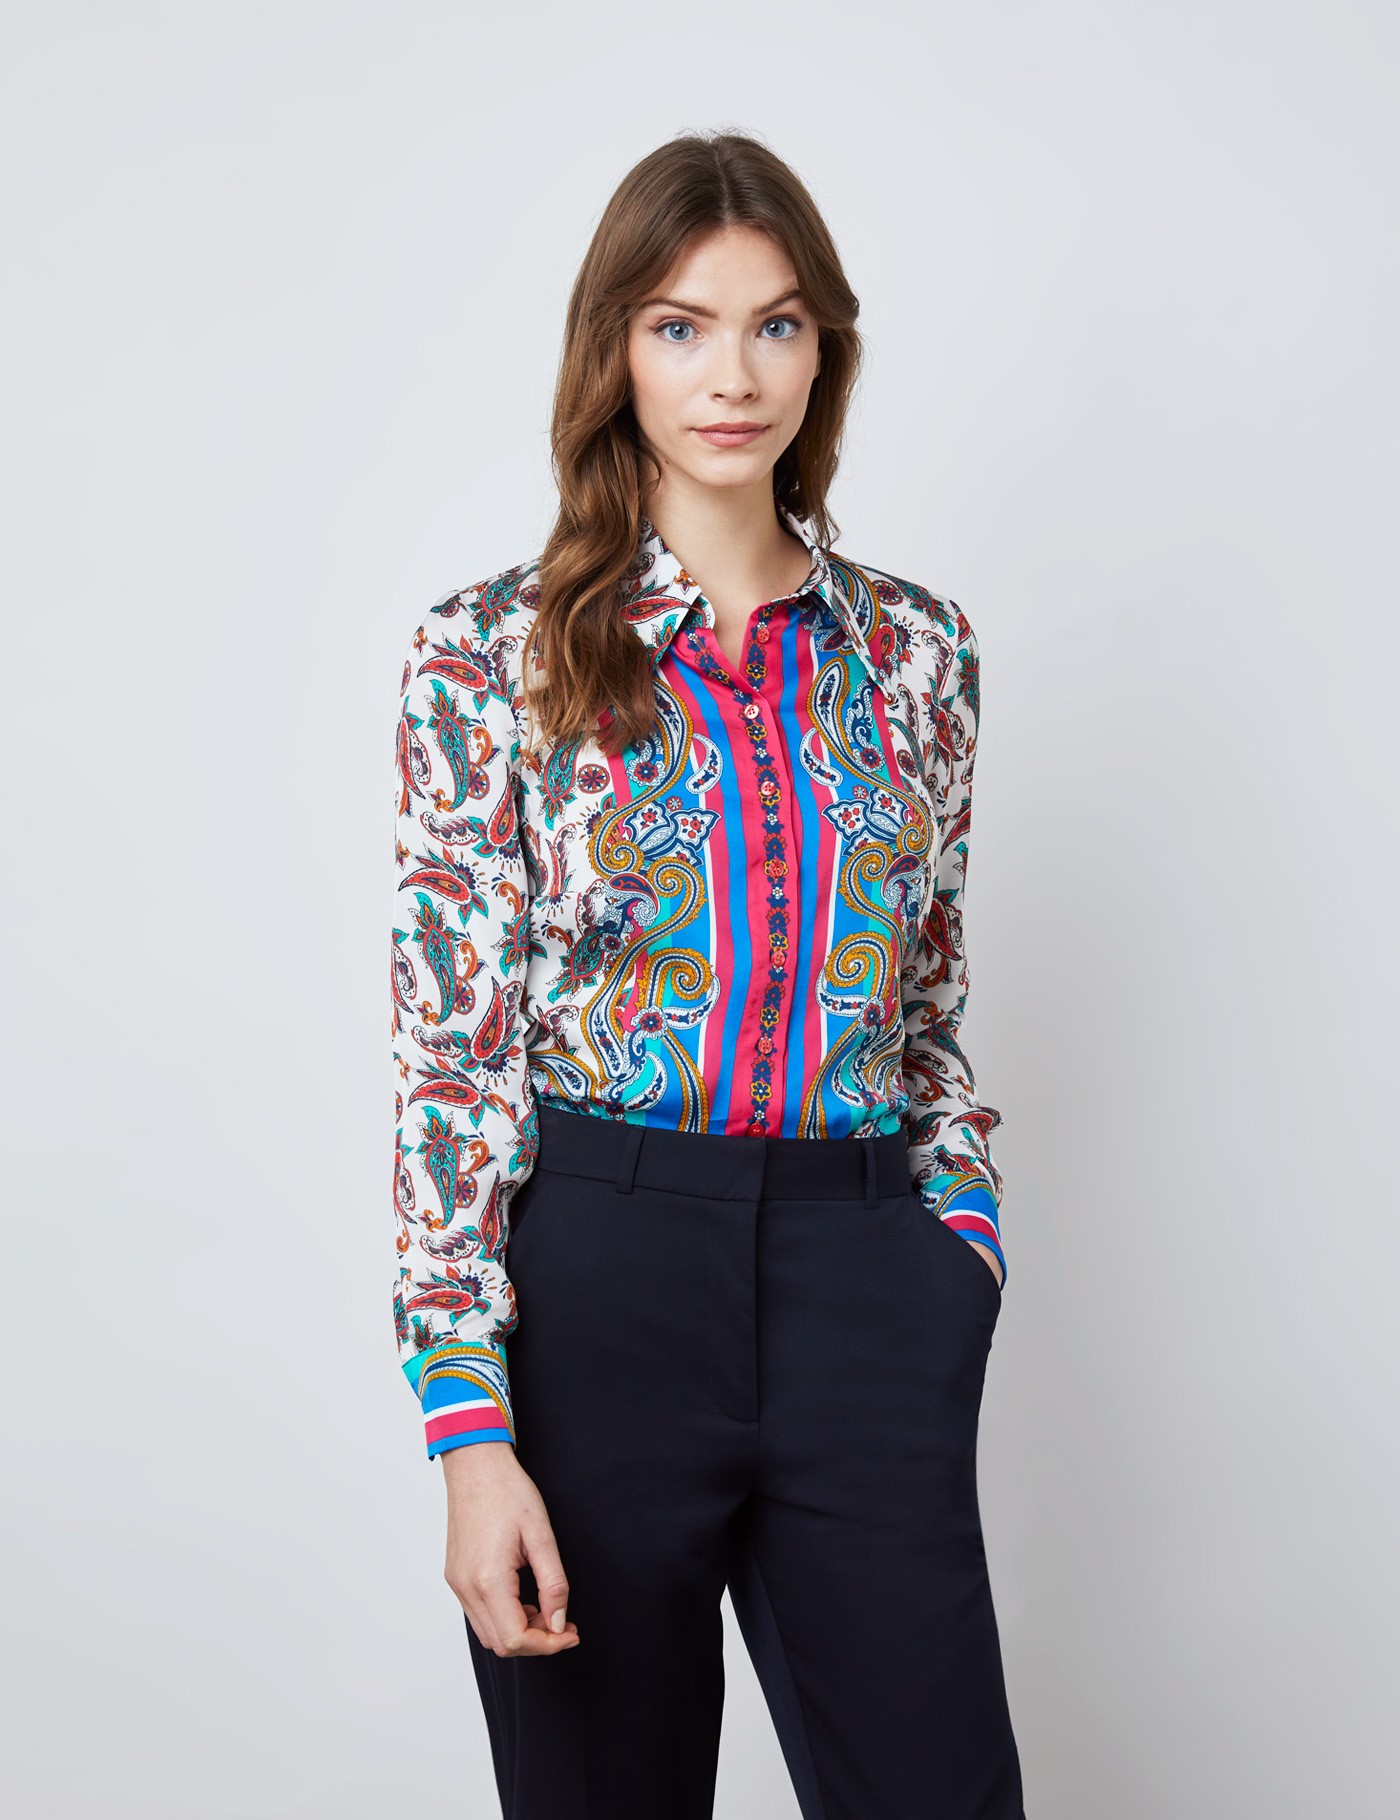 Luxury Satin Women’s Boutique Blouse with Paisley Placement Print and ...